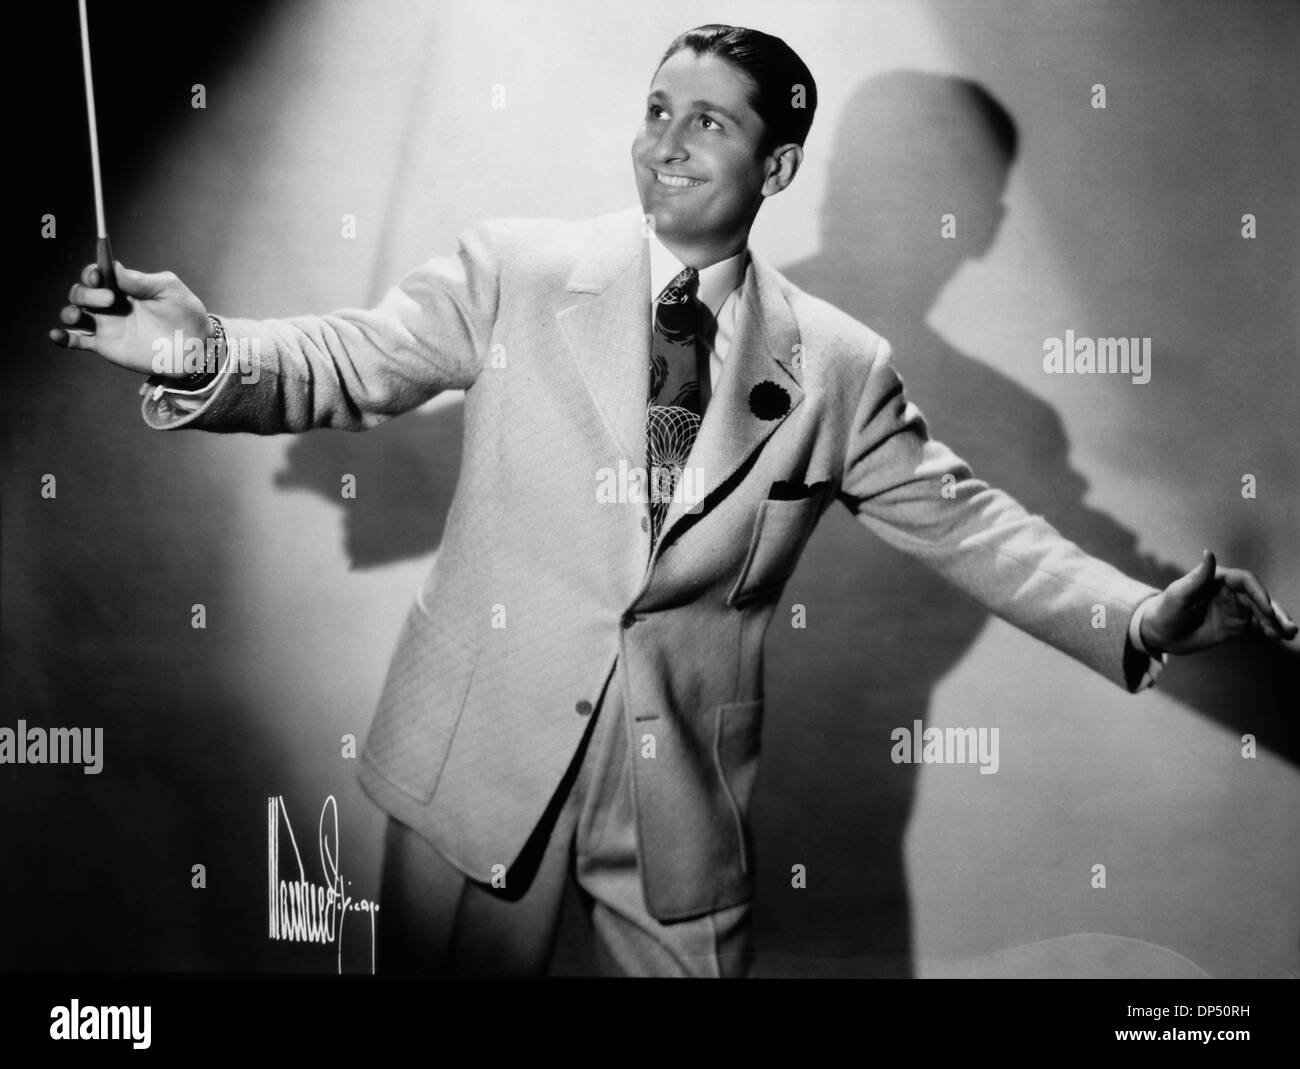 Lawrence Welk (1903-1992), American Musician and Band Leader, Portrait, circa 1940's Stock Photo